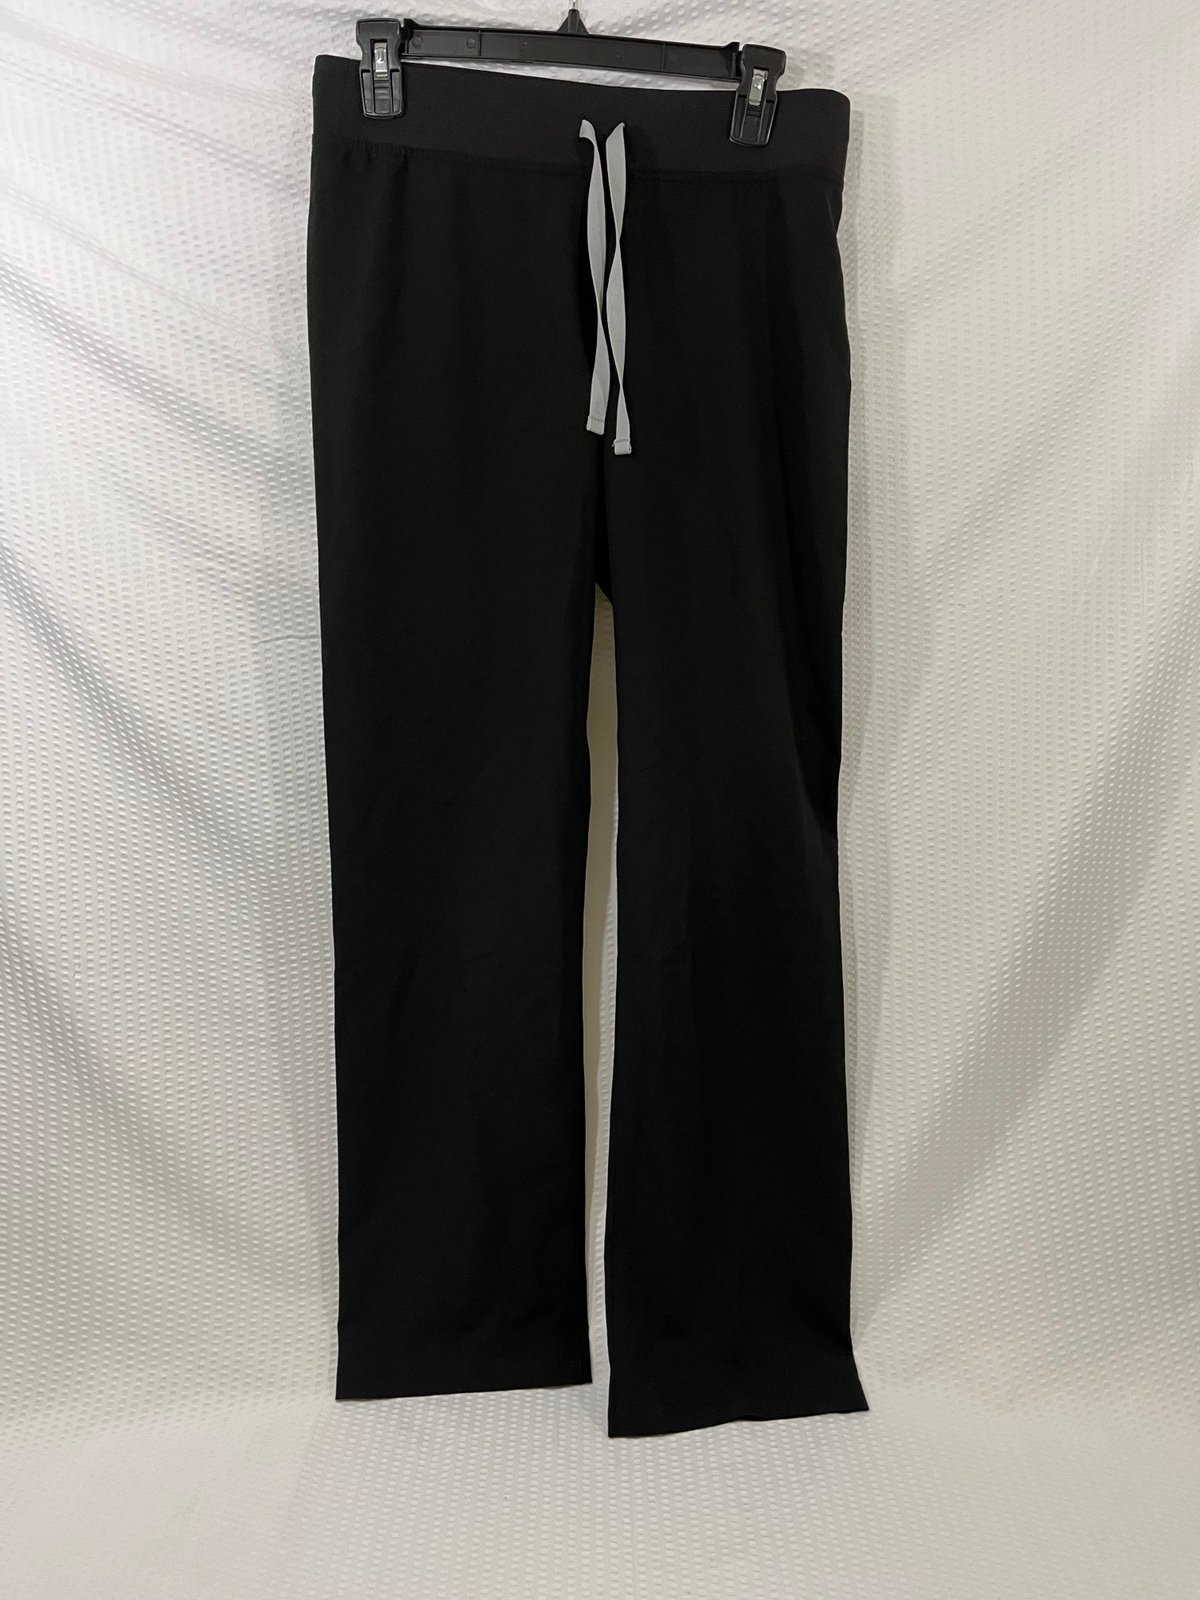 Affordable Figs Technical Collection Livingston Basic Scrub Pants Black Size XS NWT KWKDfuelf Cheap